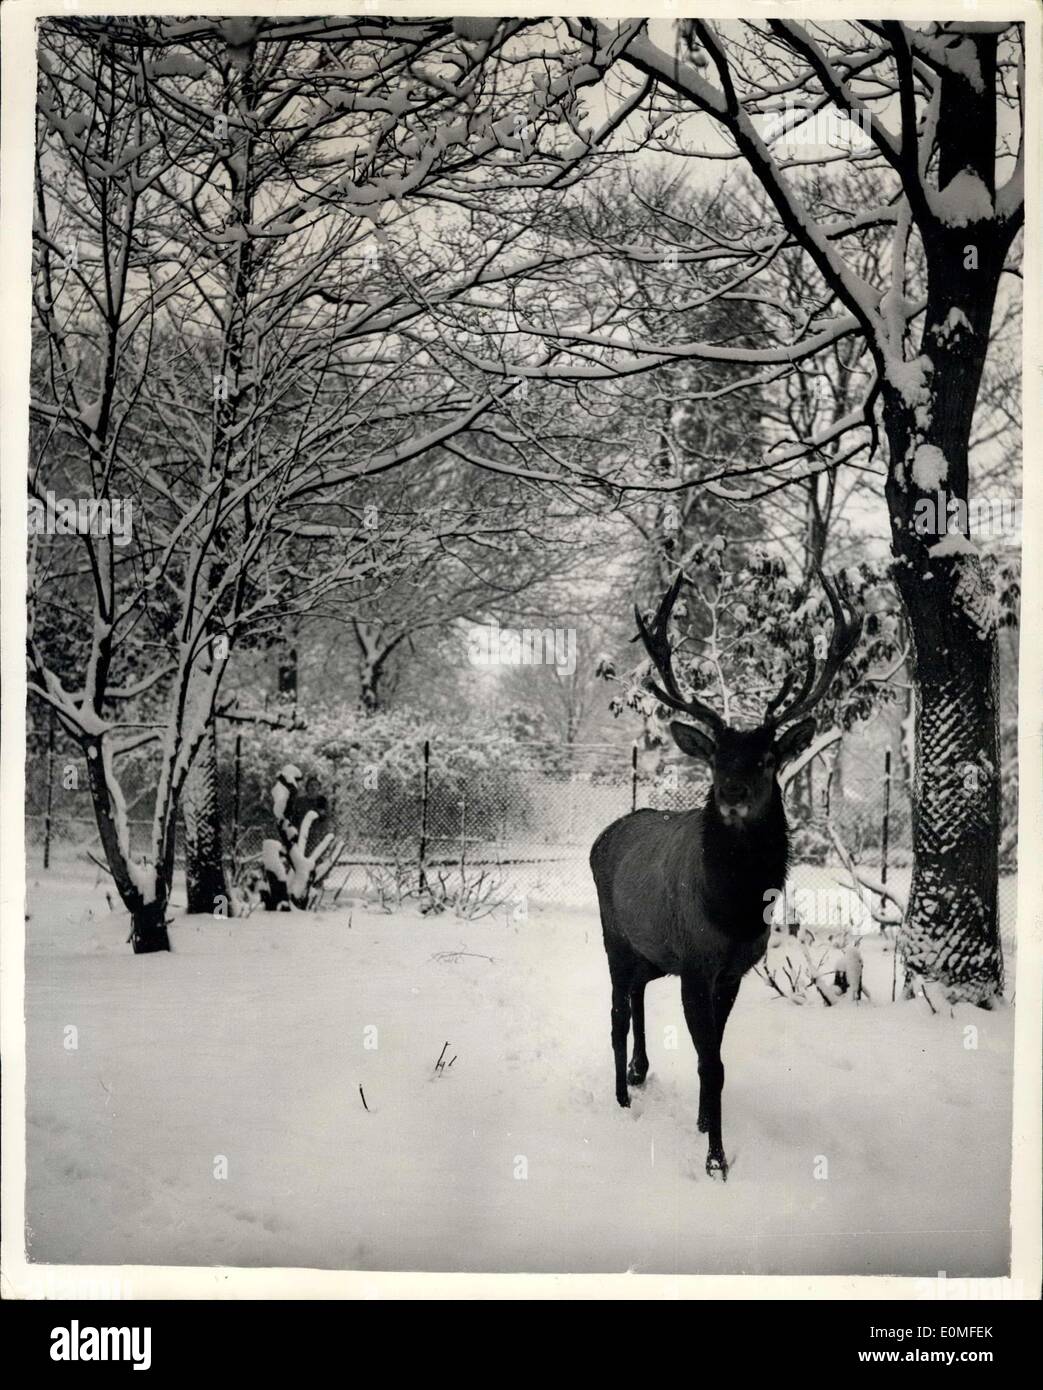 Feb. 25, 1955 - The Reindeer is happy- In the shows at chester zoo. Photo shows ''Wappy''-a Wapiti type reindeer appears to be Stock Photo